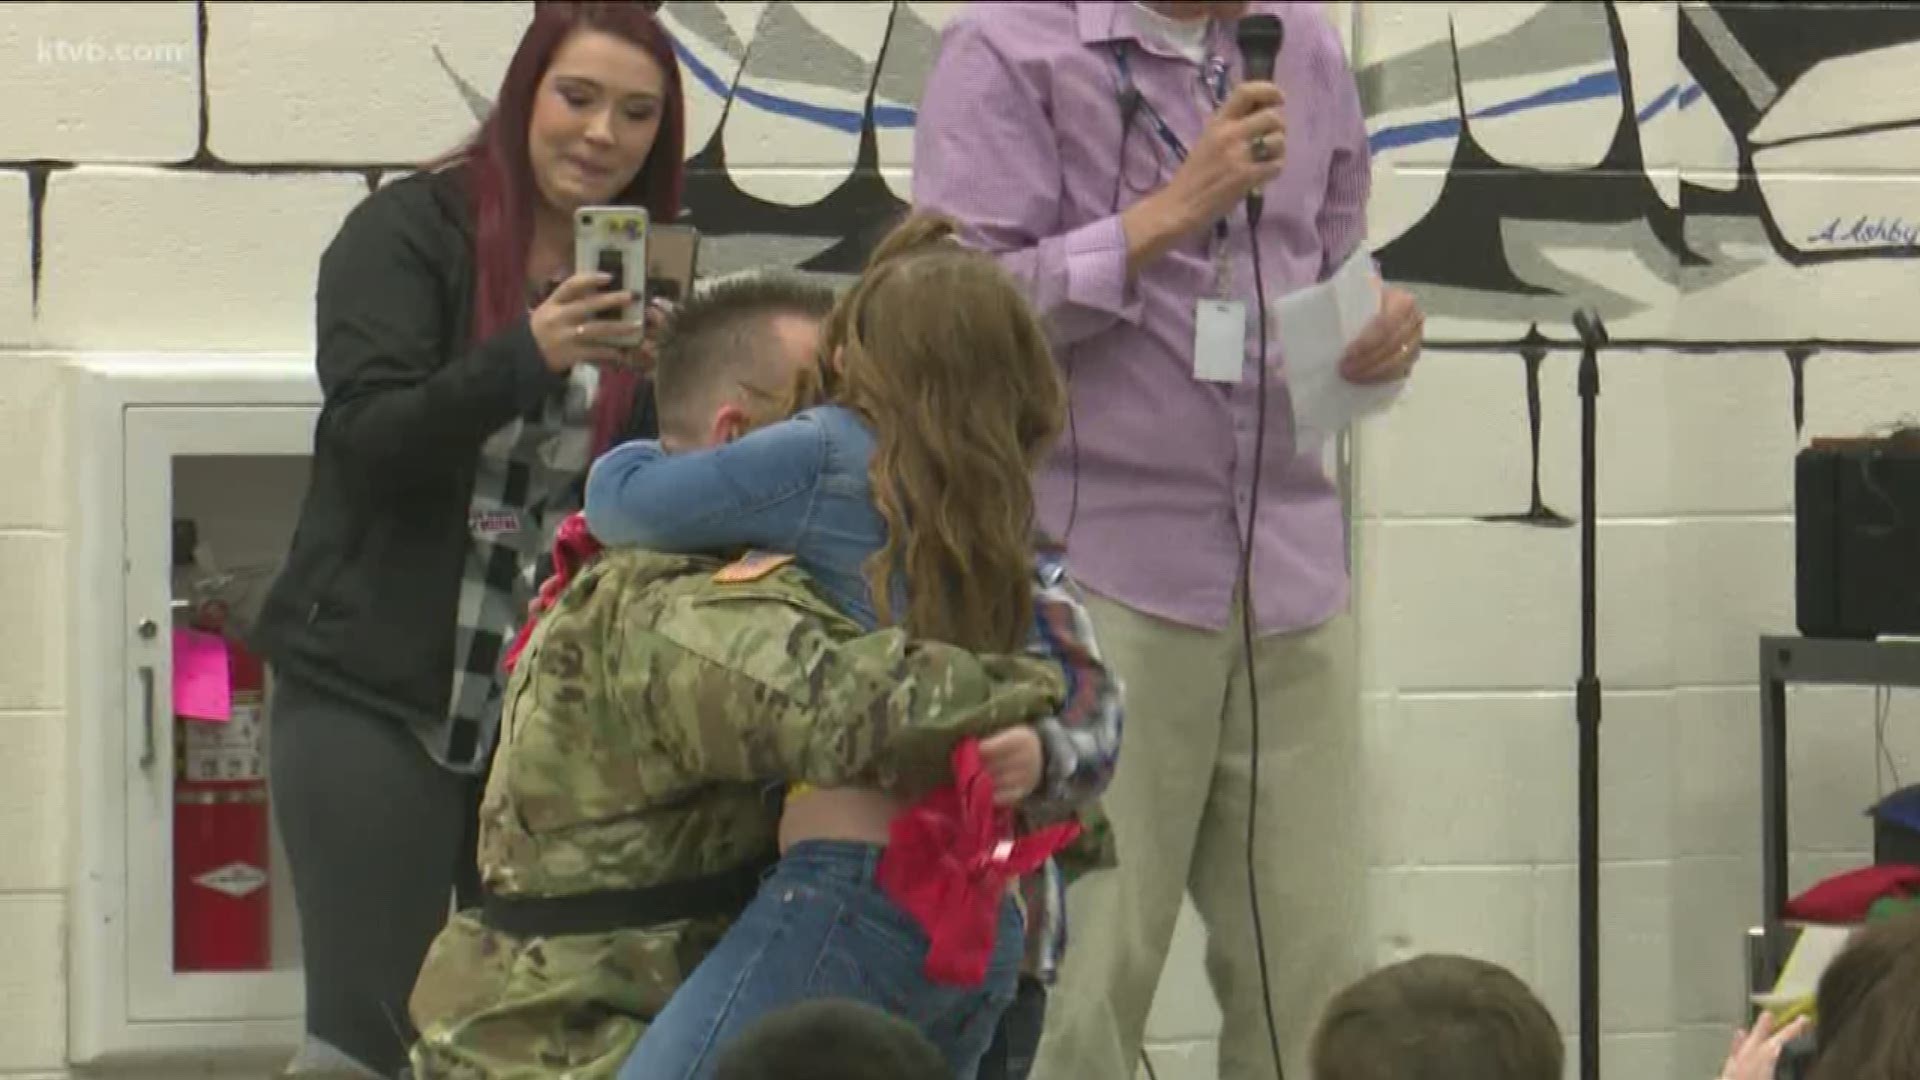 KTVB captured the emotional reunion at Park Ridge Elementary School in Nampa during a student assembly.